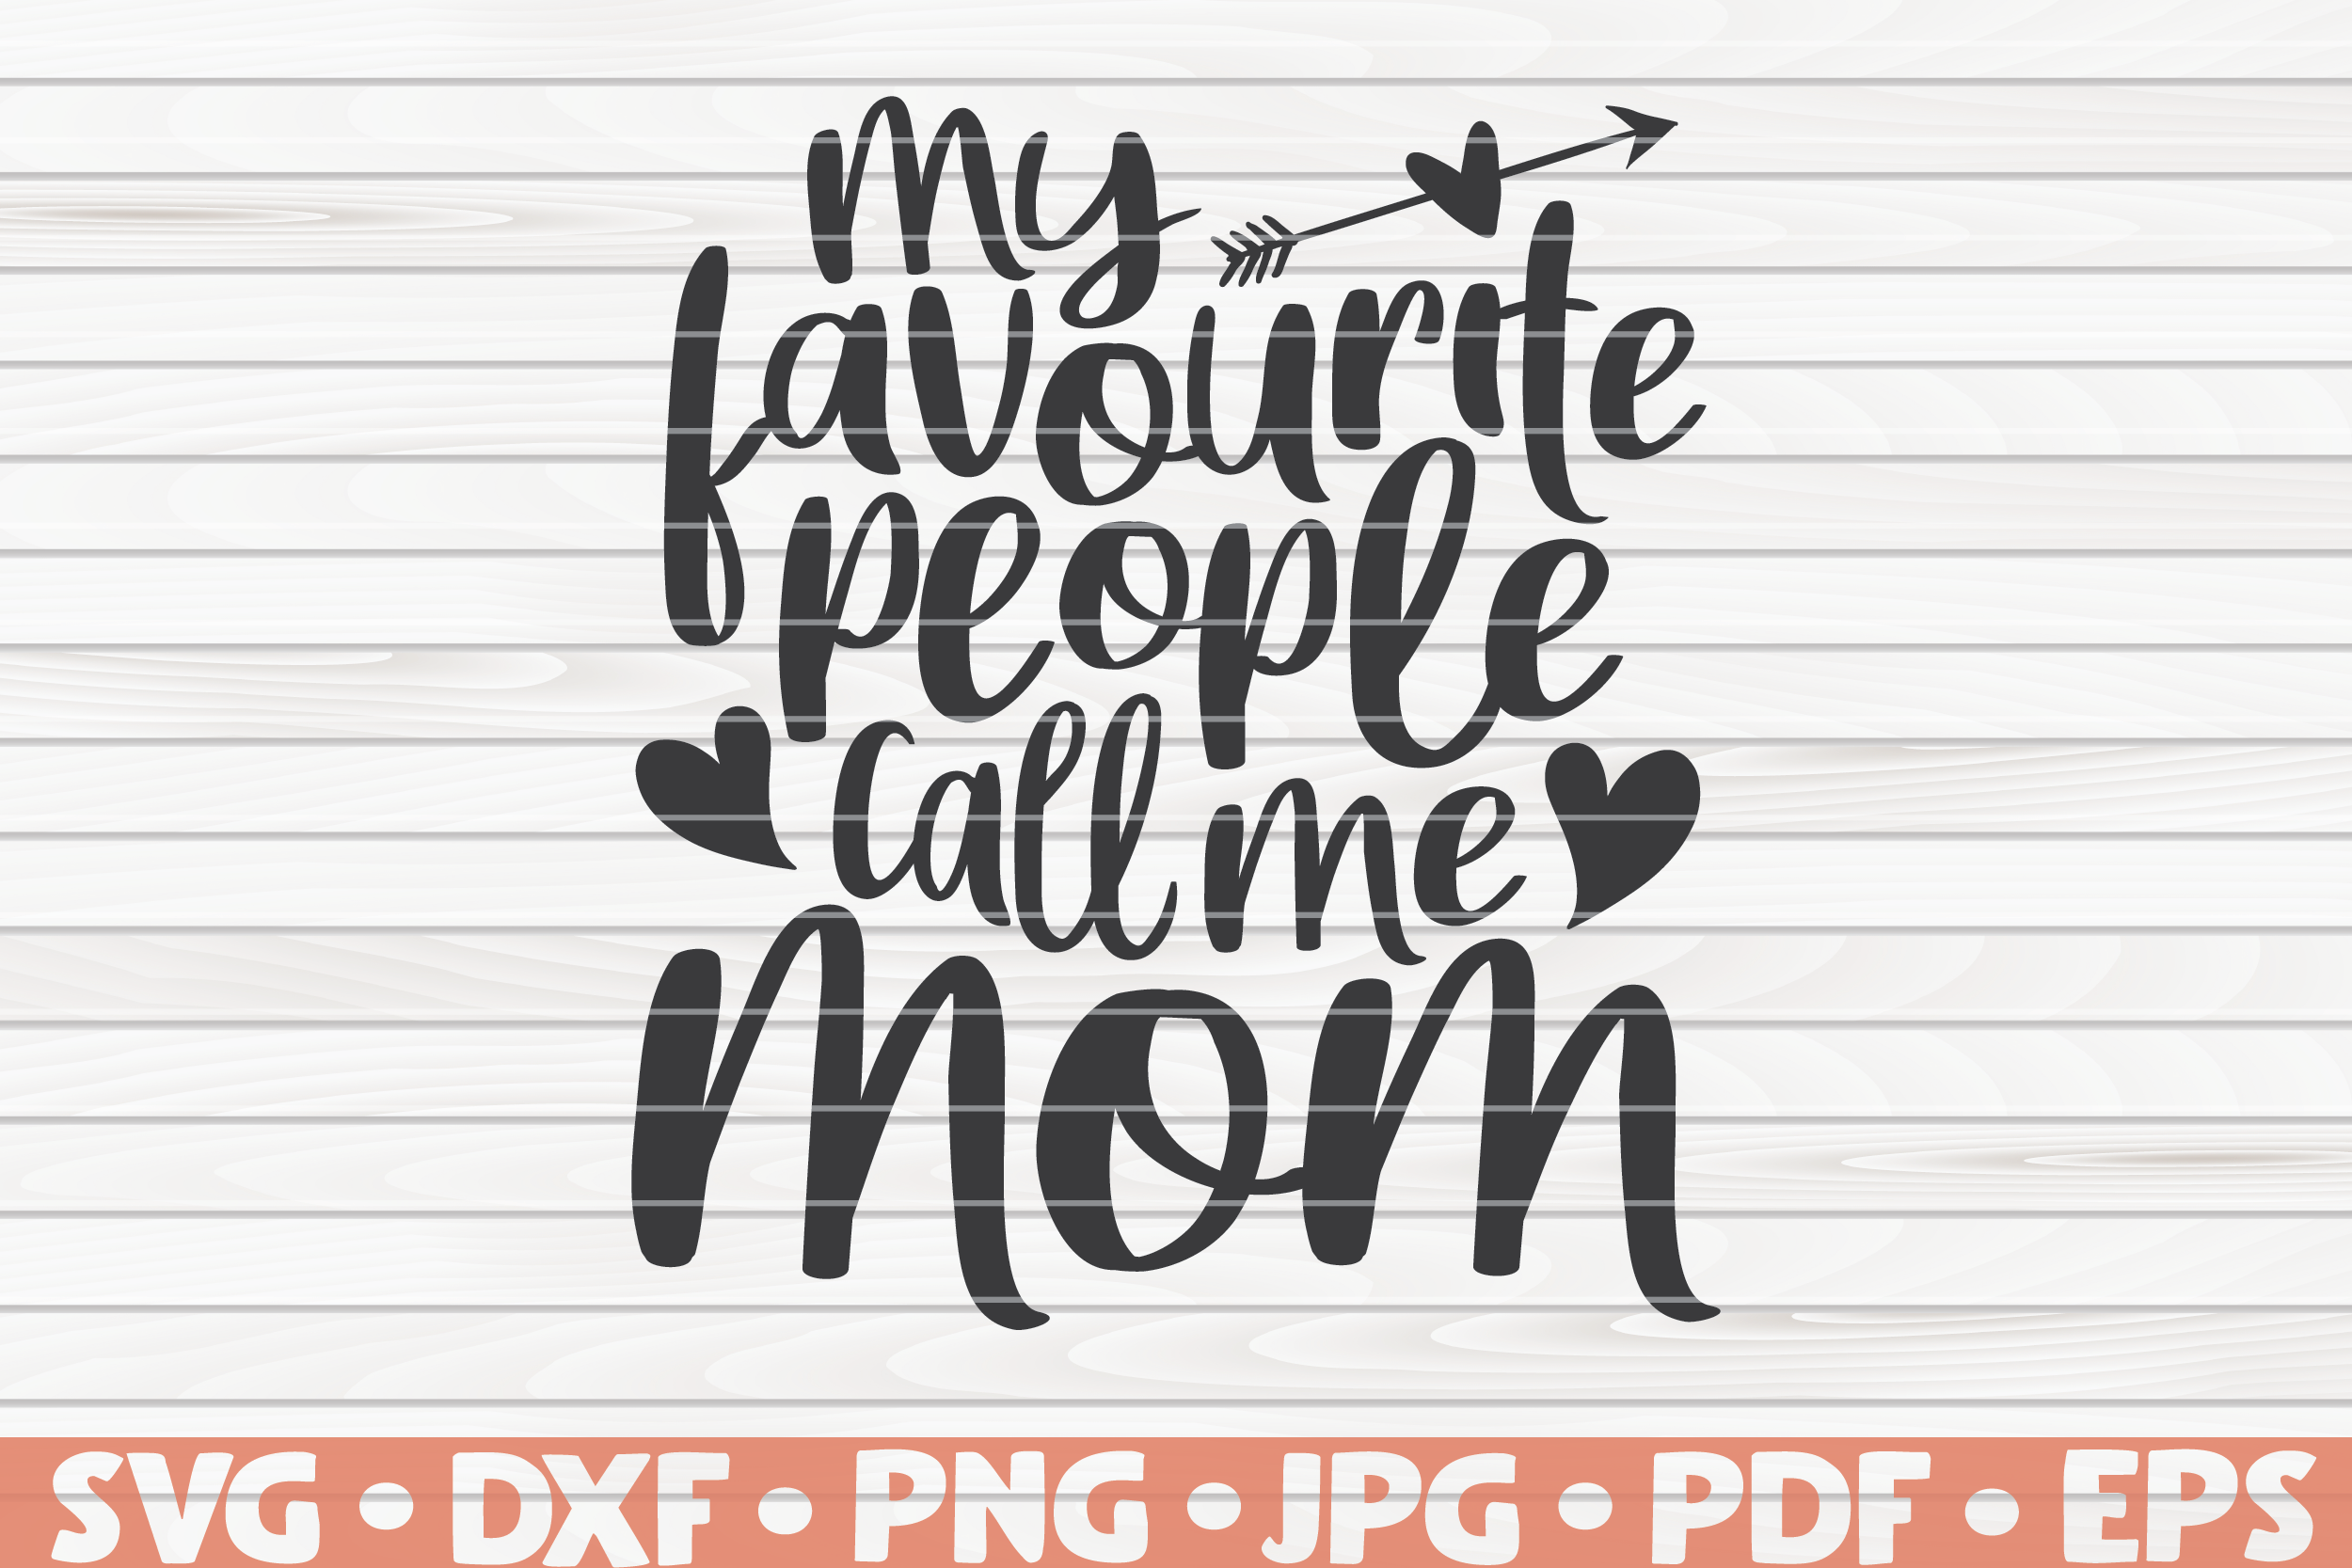 Mom of 1 kid Svg My Favorite Person Calls Me Mom Svg Mothers Day Svg Png First Mothers Day Png Eps Digital Download Jpg